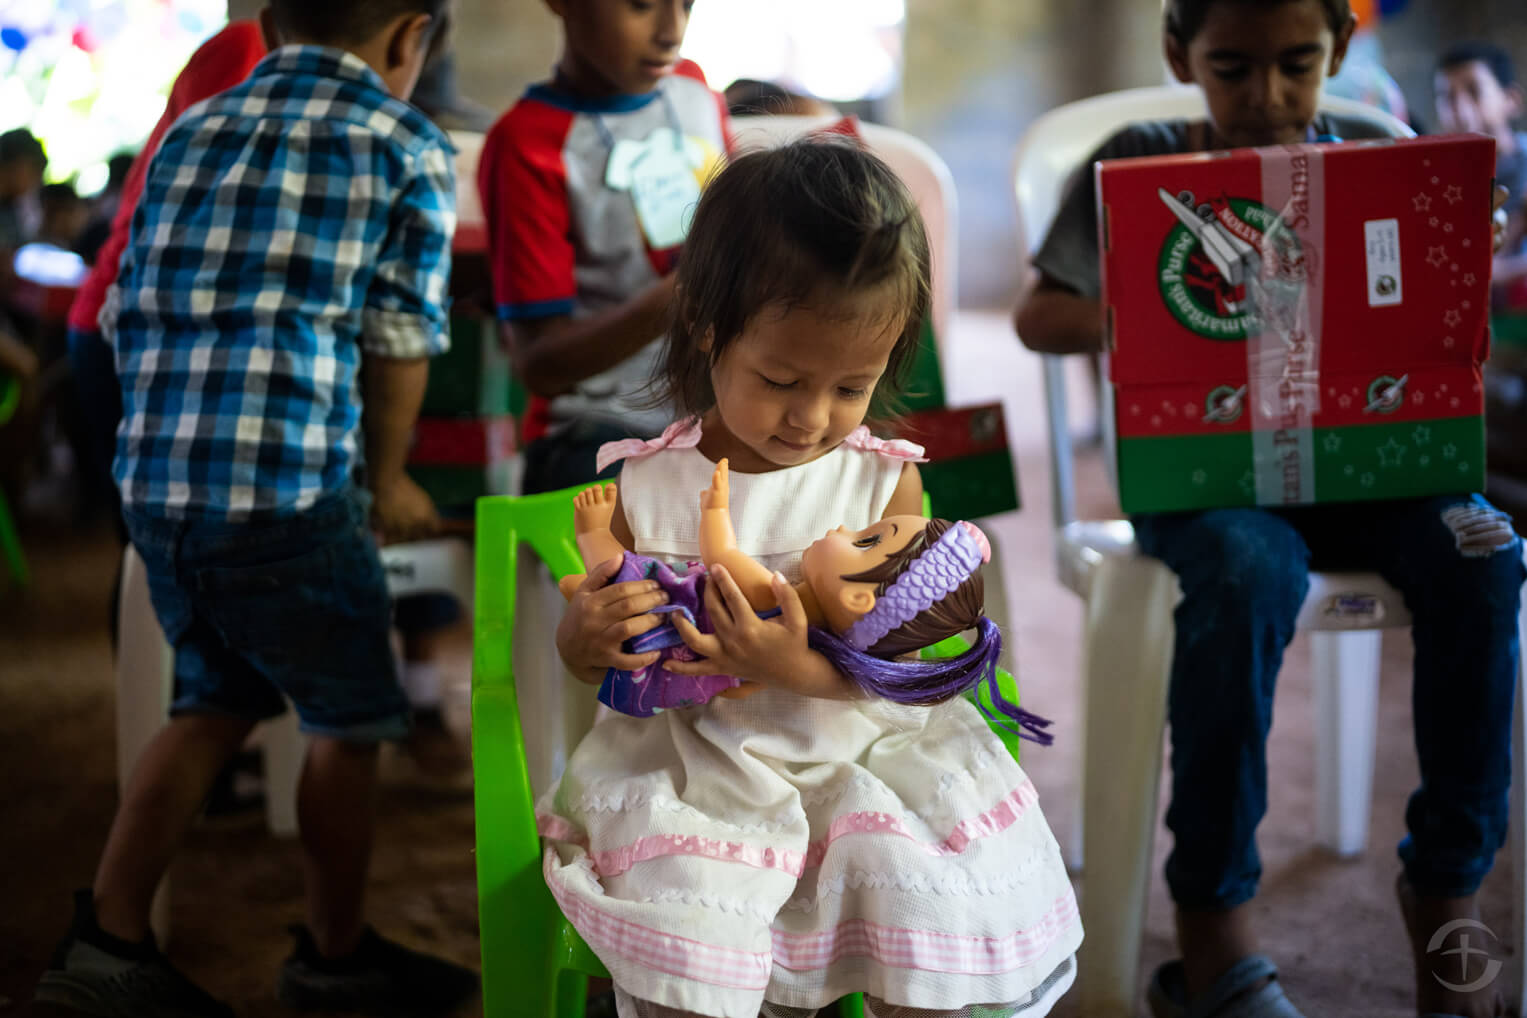 A young girl enjoys the doll she received in her Operation Christmas Child shoebox.